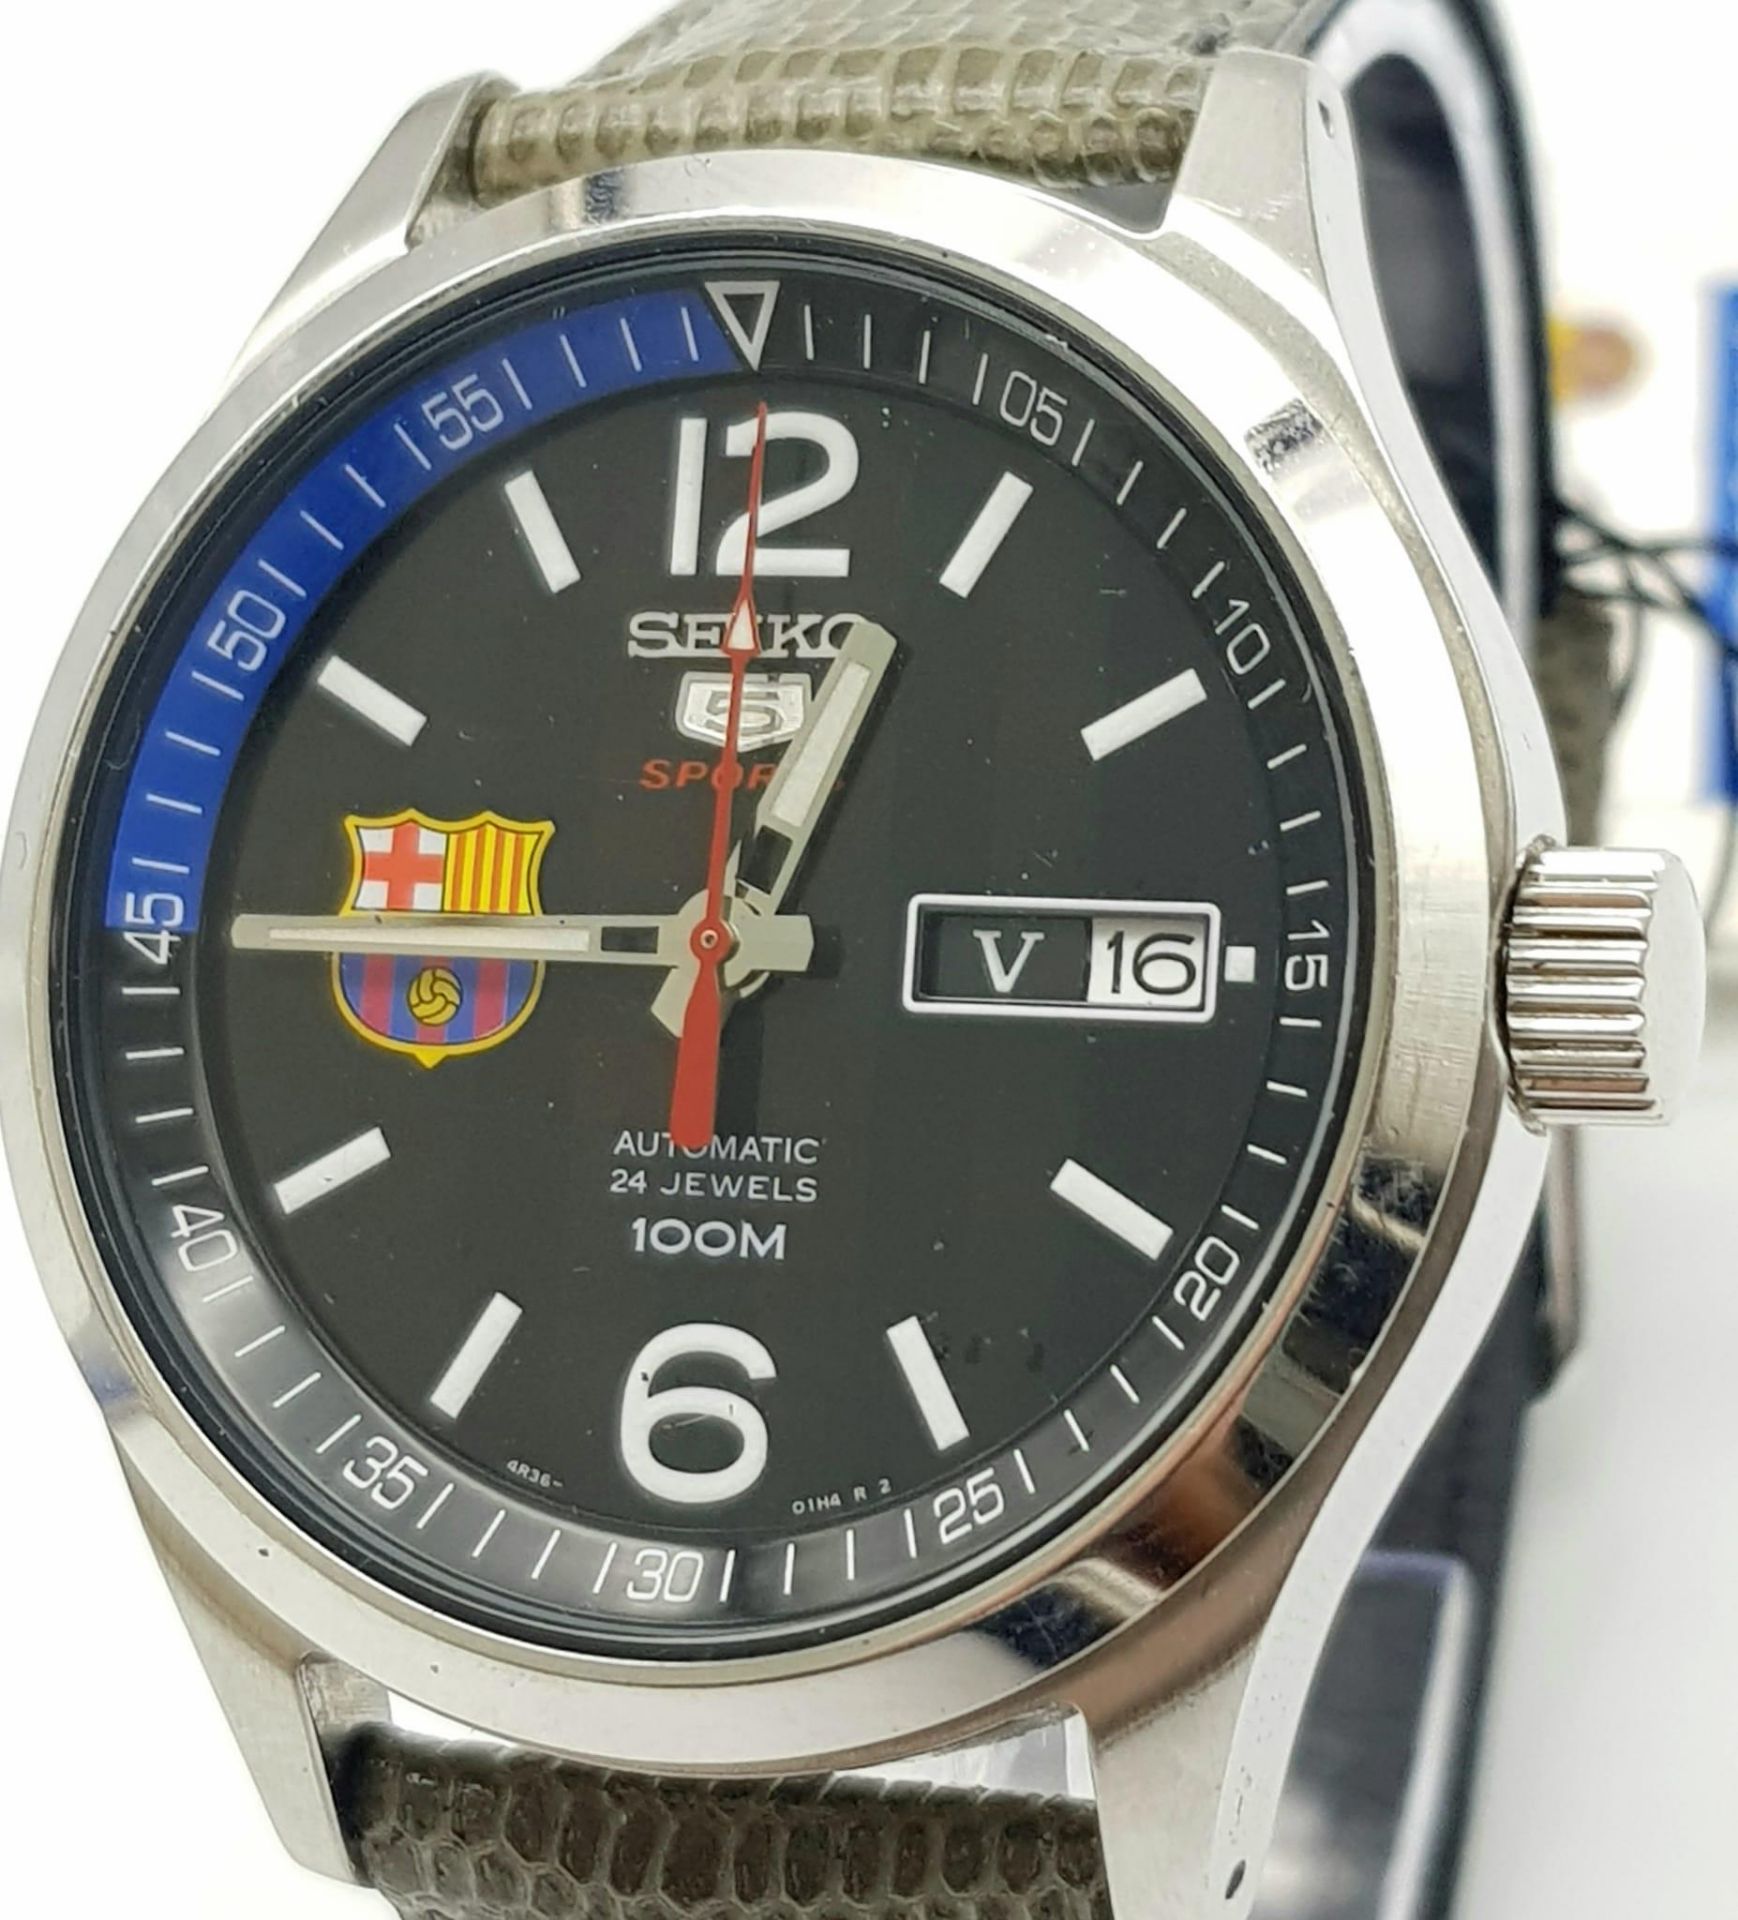 A SEIKO "BARCELONA F.C."AUTOMATIC GENTS WATCH WITH SKELETON BACK , NEVER WORN AS NEW WITH TAGS STILL - Bild 3 aus 7